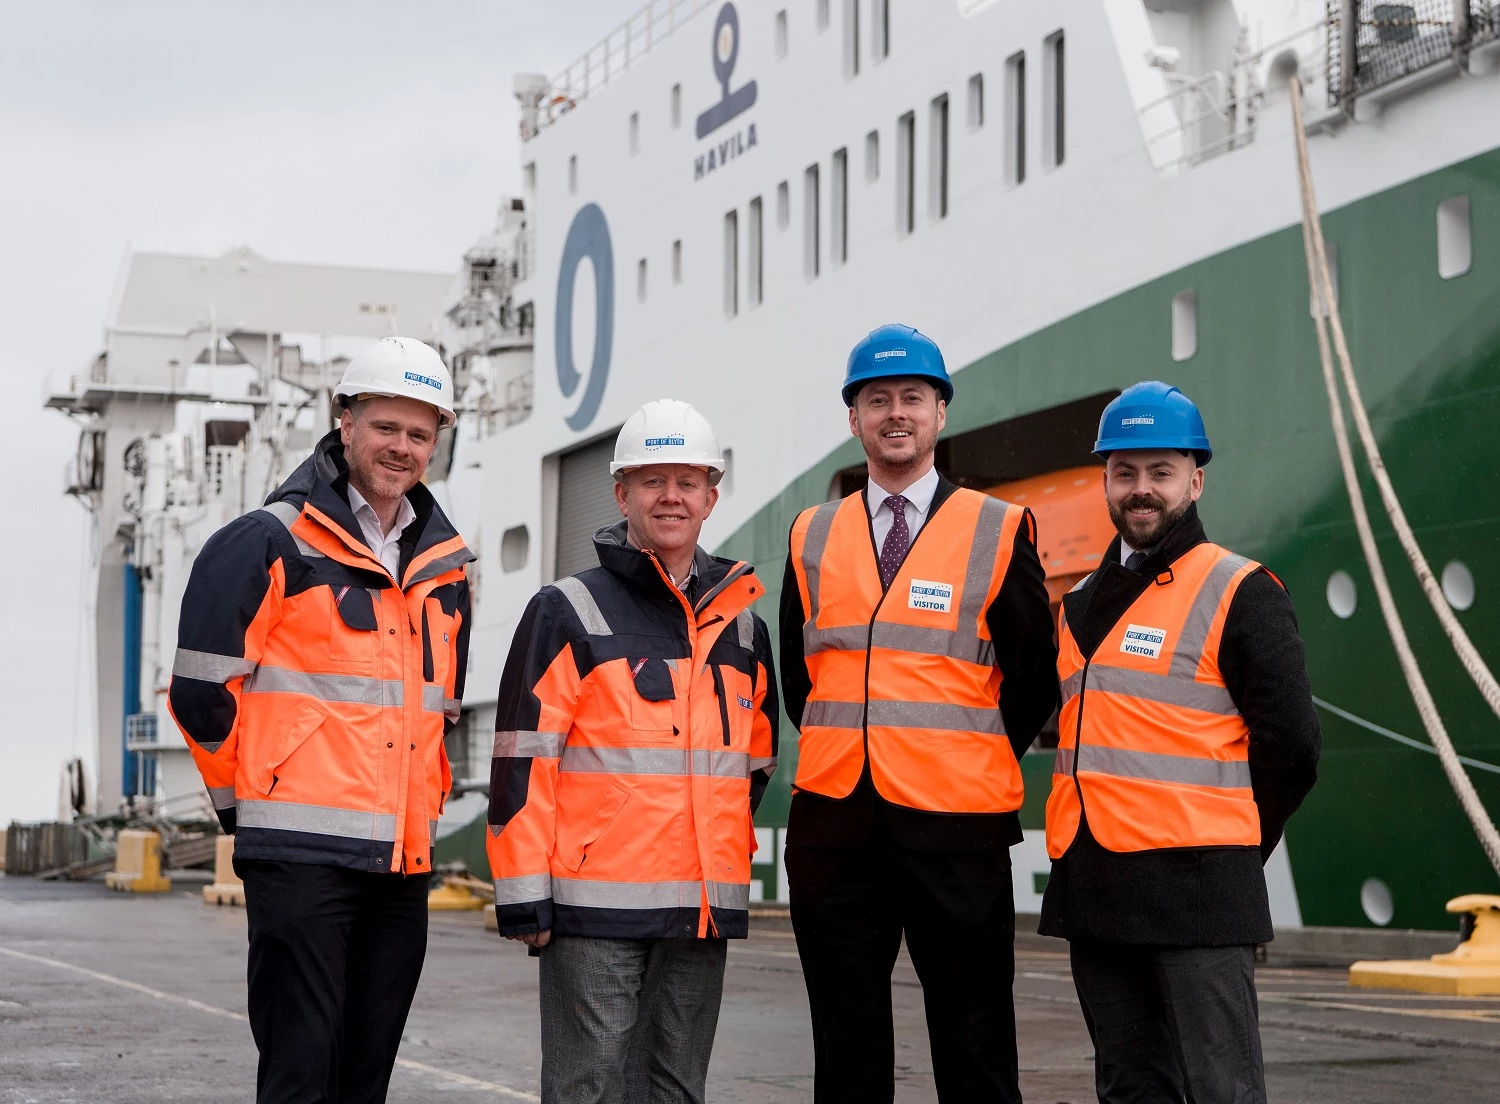 Paul Parry, Business Development Manager of Port Training Services, Martin Lawlor, CEO of Port of Blyth, Jon Ridley, Assistant Principal Newcastle College and Marc McPake, Director of Business Partnerships Newcastle College